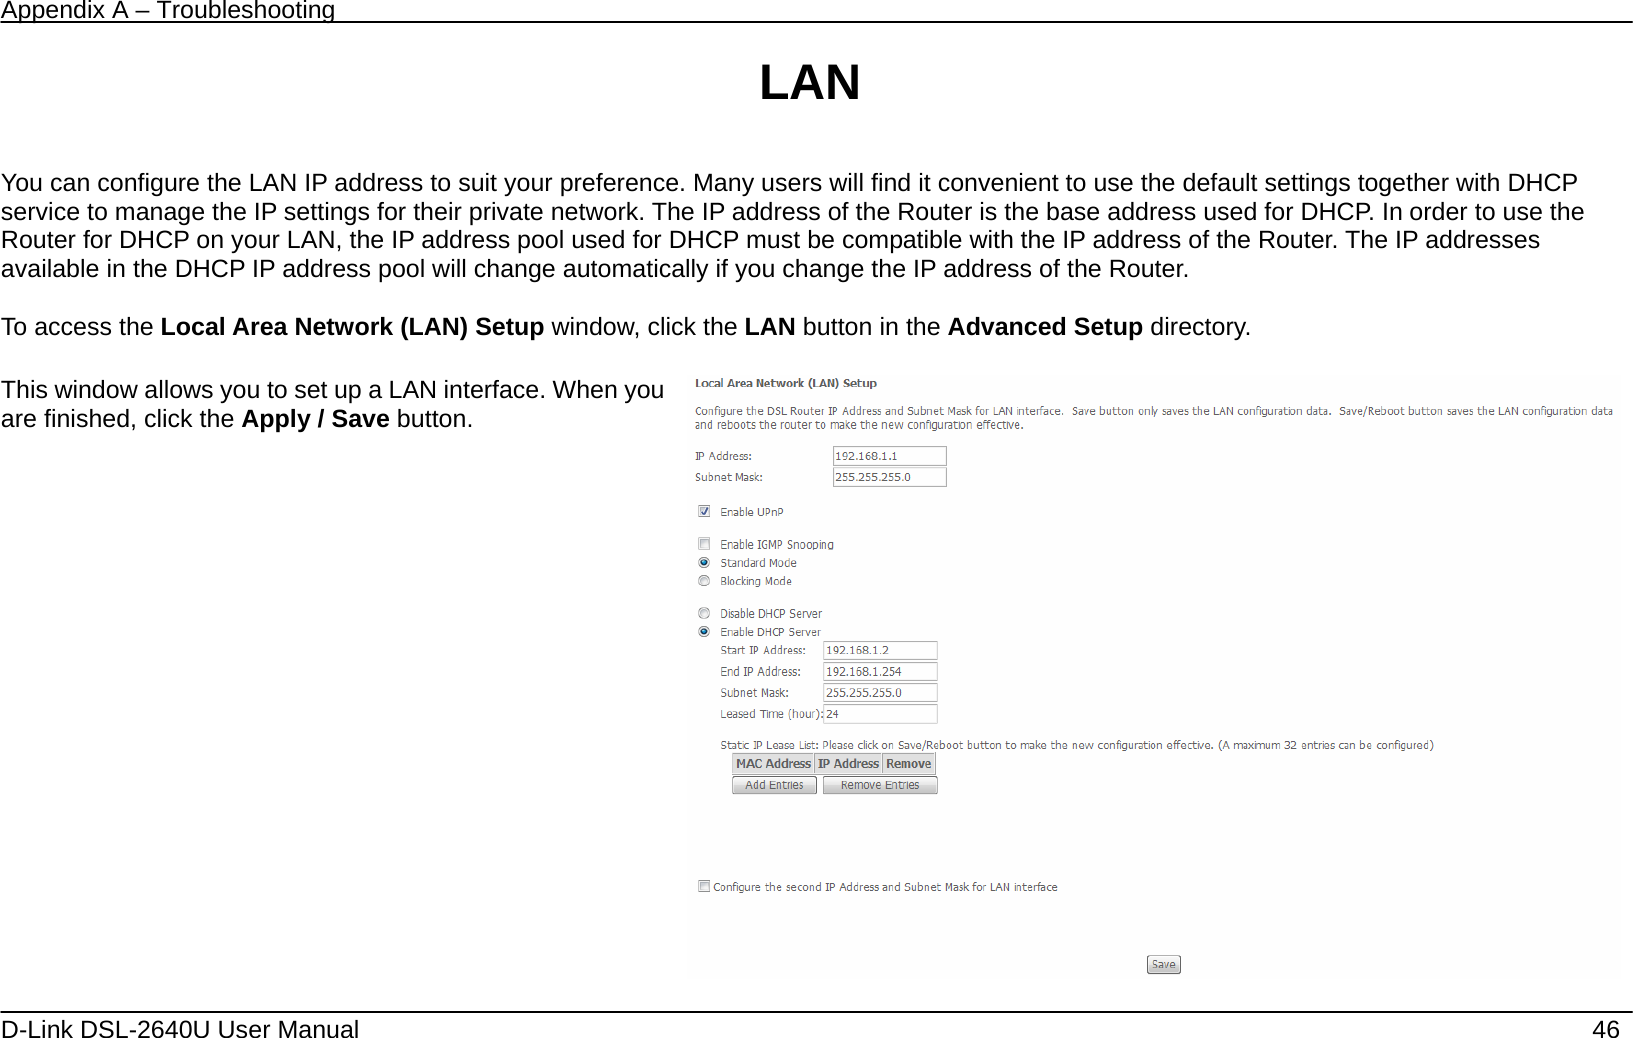 Appendix A – Troubleshooting   D-Link DSL-2640U User Manual    46 LAN  You can configure the LAN IP address to suit your preference. Many users will find it convenient to use the default settings together with DHCP service to manage the IP settings for their private network. The IP address of the Router is the base address used for DHCP. In order to use the Router for DHCP on your LAN, the IP address pool used for DHCP must be compatible with the IP address of the Router. The IP addresses available in the DHCP IP address pool will change automatically if you change the IP address of the Router.      To access the Local Area Network (LAN) Setup window, click the LAN button in the Advanced Setup directory.  This window allows you to set up a LAN interface. When you are finished, click the Apply / Save button.    